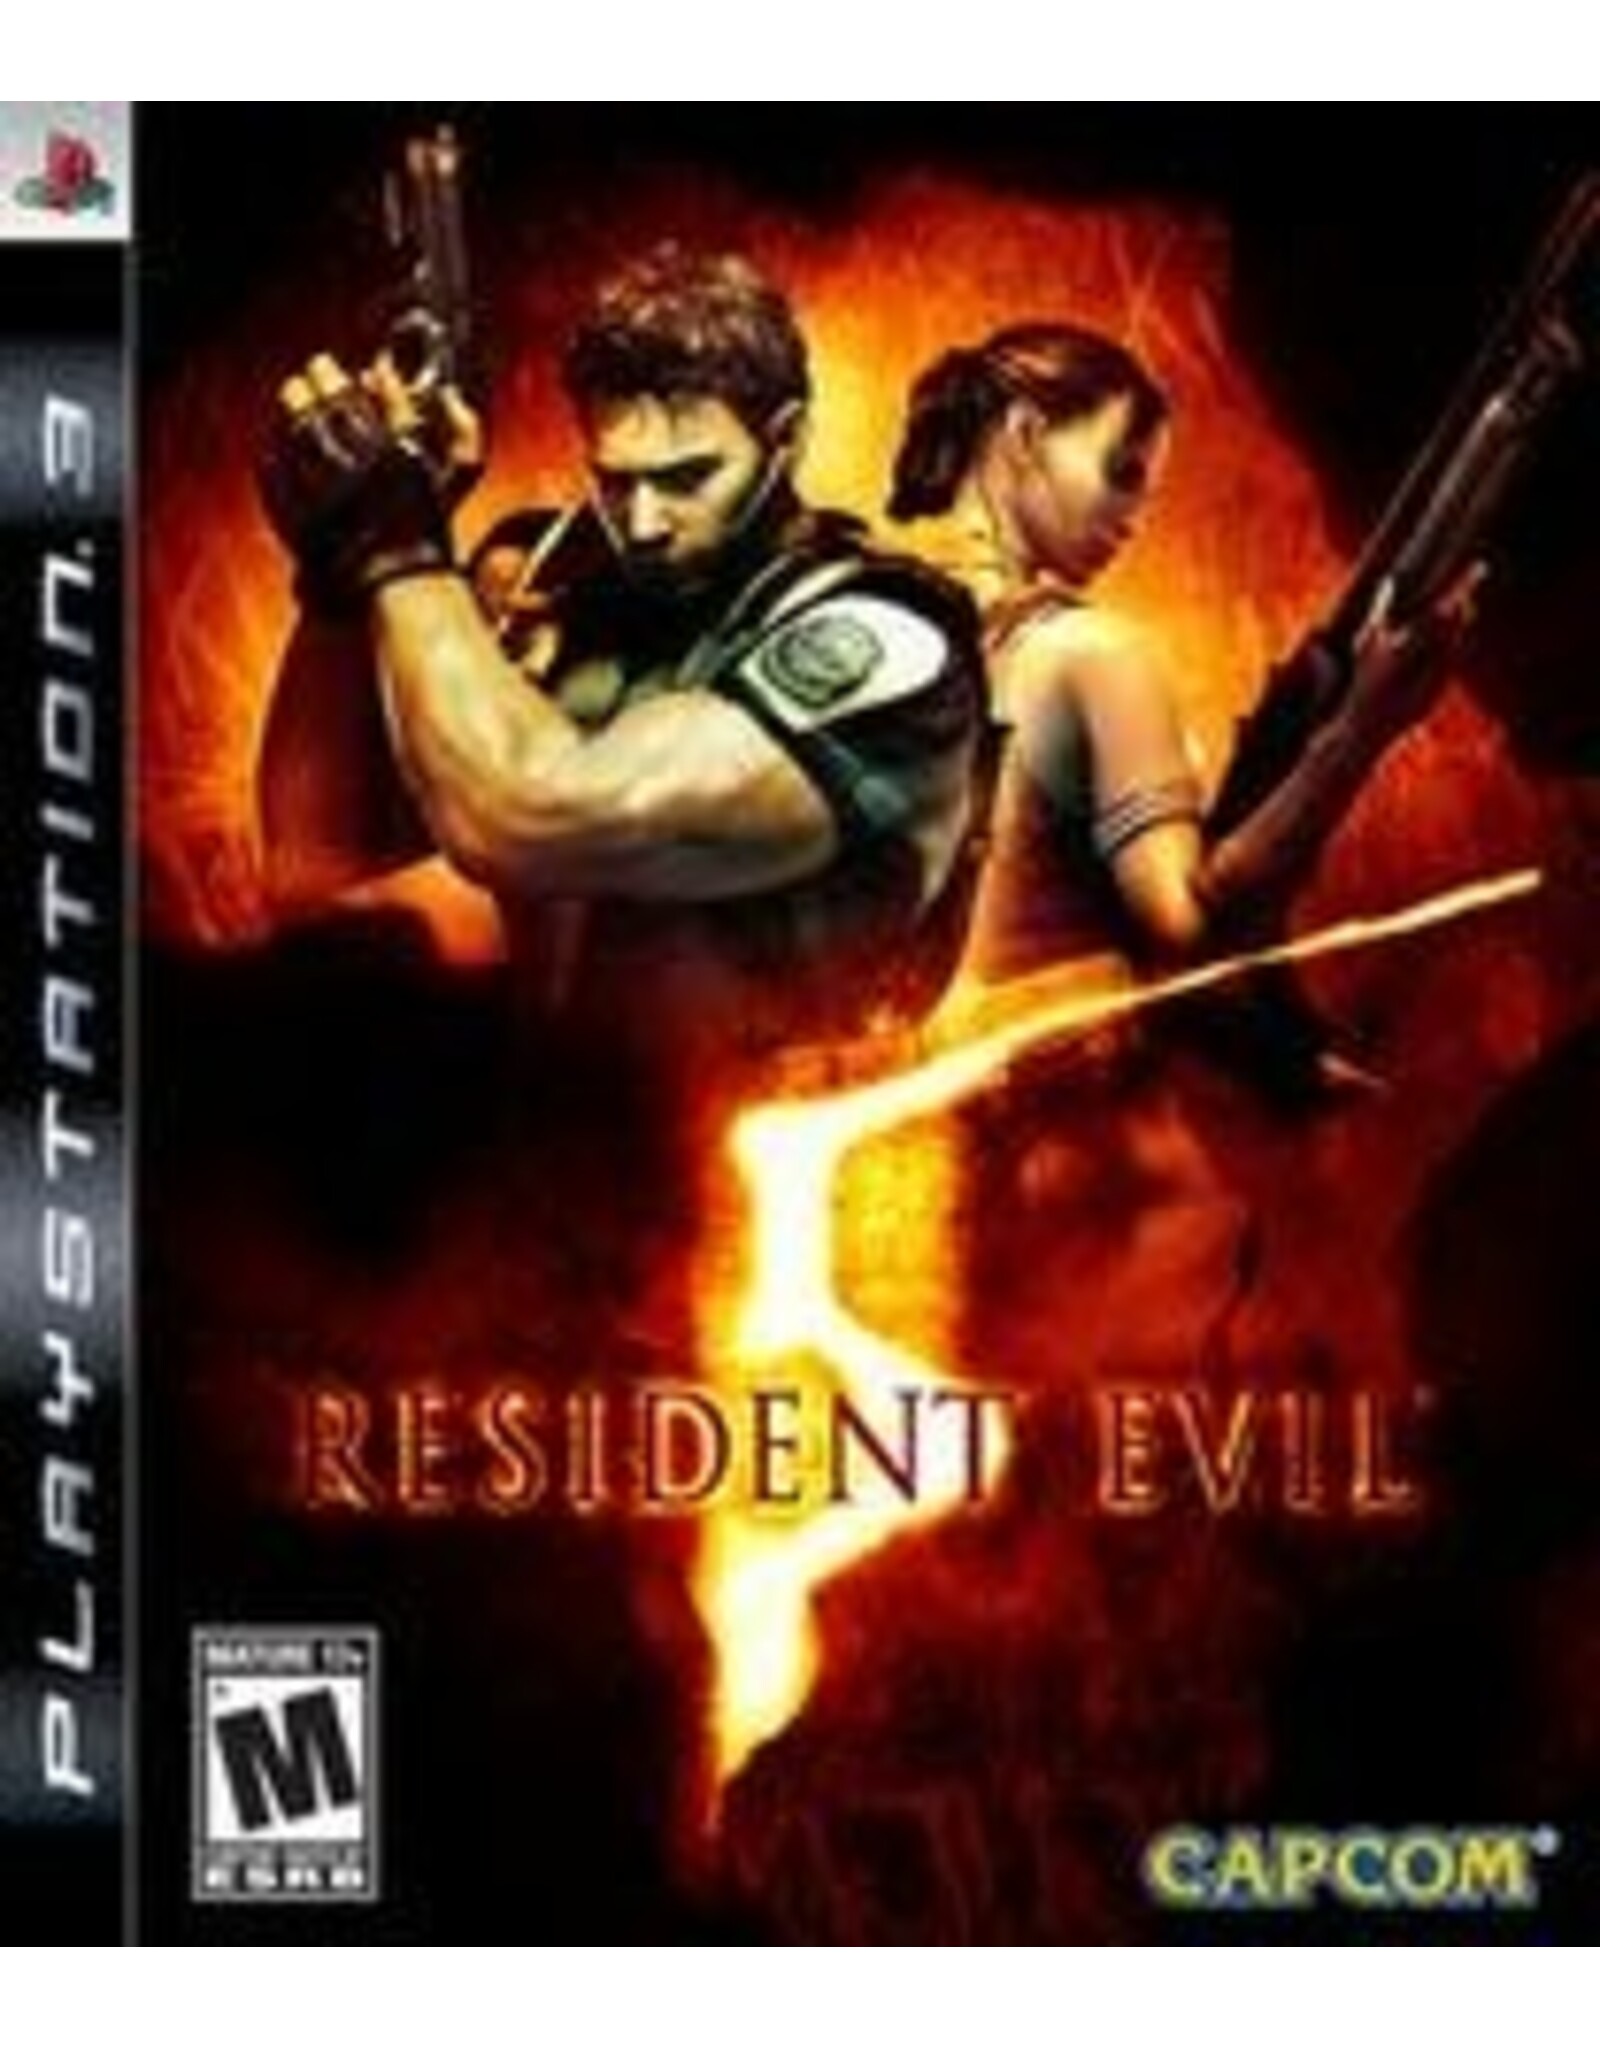 Used Game - Playstation 3 - Resident Evil 5 [CIB]